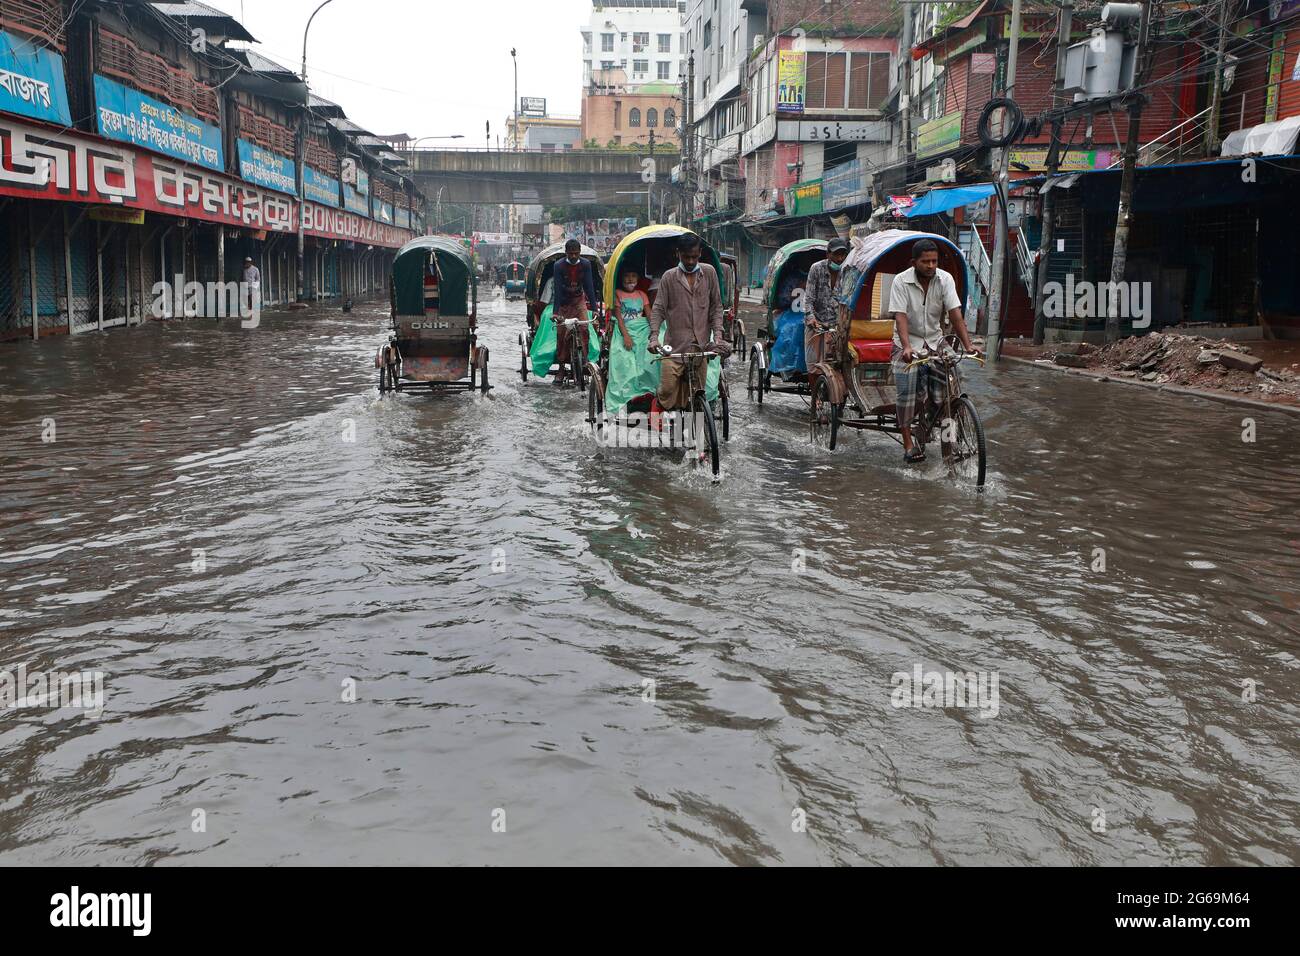 Dhaka, Bangladesh - July 04, 2021: Vehicles try to drive through a flooded street in Dhaka, Bangladesh. Encroachment of canals is contributing to the Stock Photo